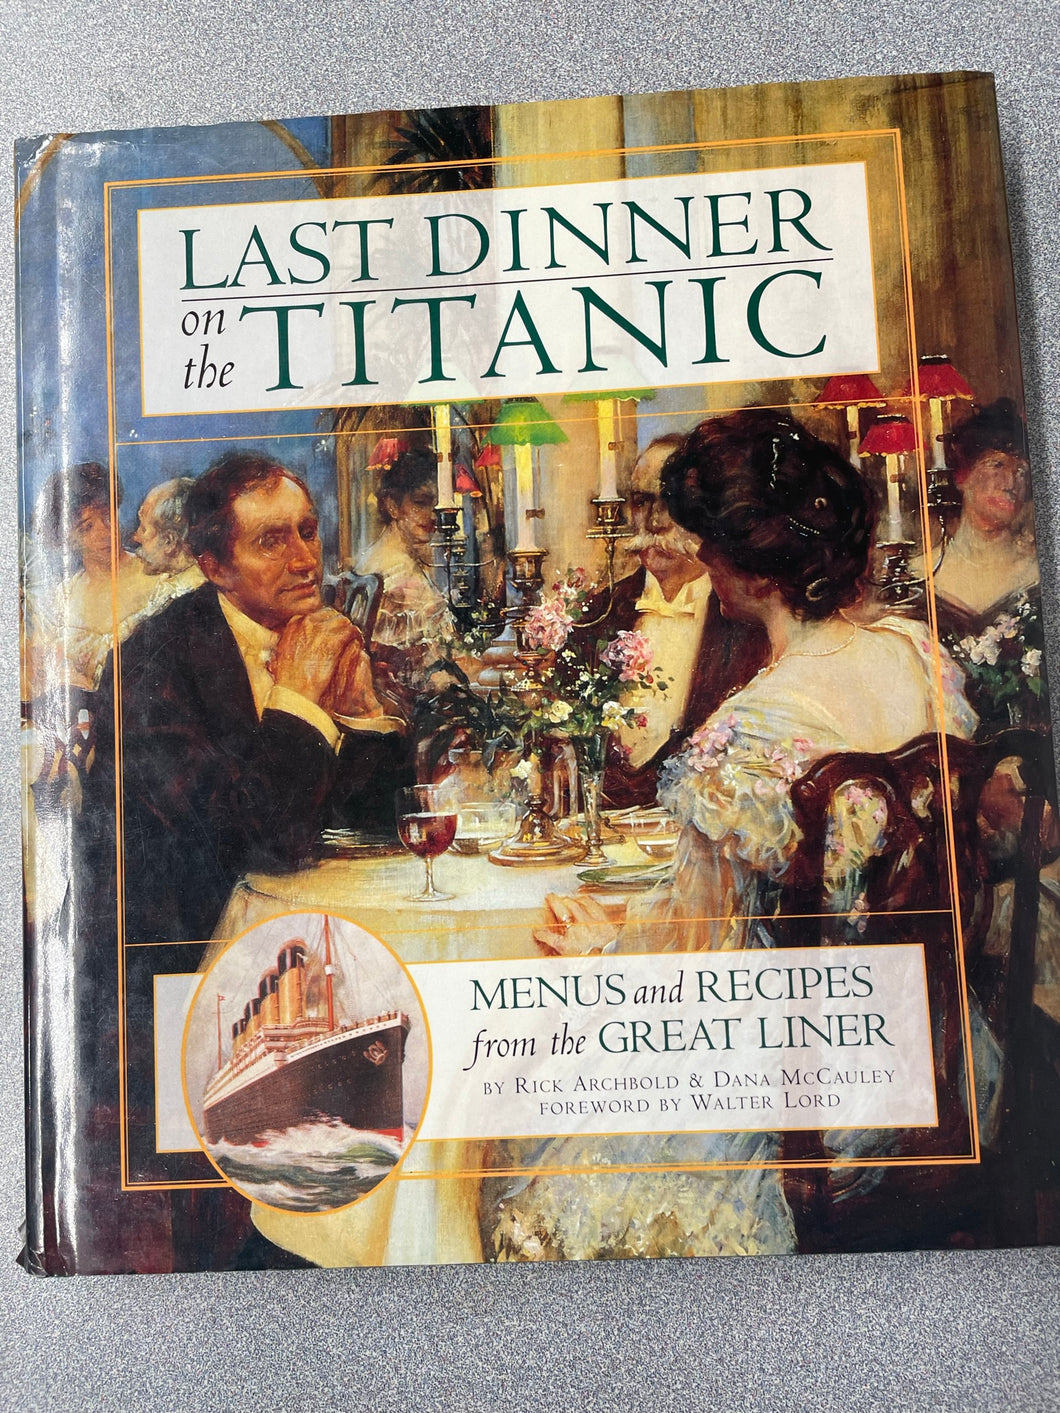 Last Dinner on the Titanic: Menus and Recipes for the Great Liner, Archbold, Rick and Dana McCauley [1997] CO 3/23